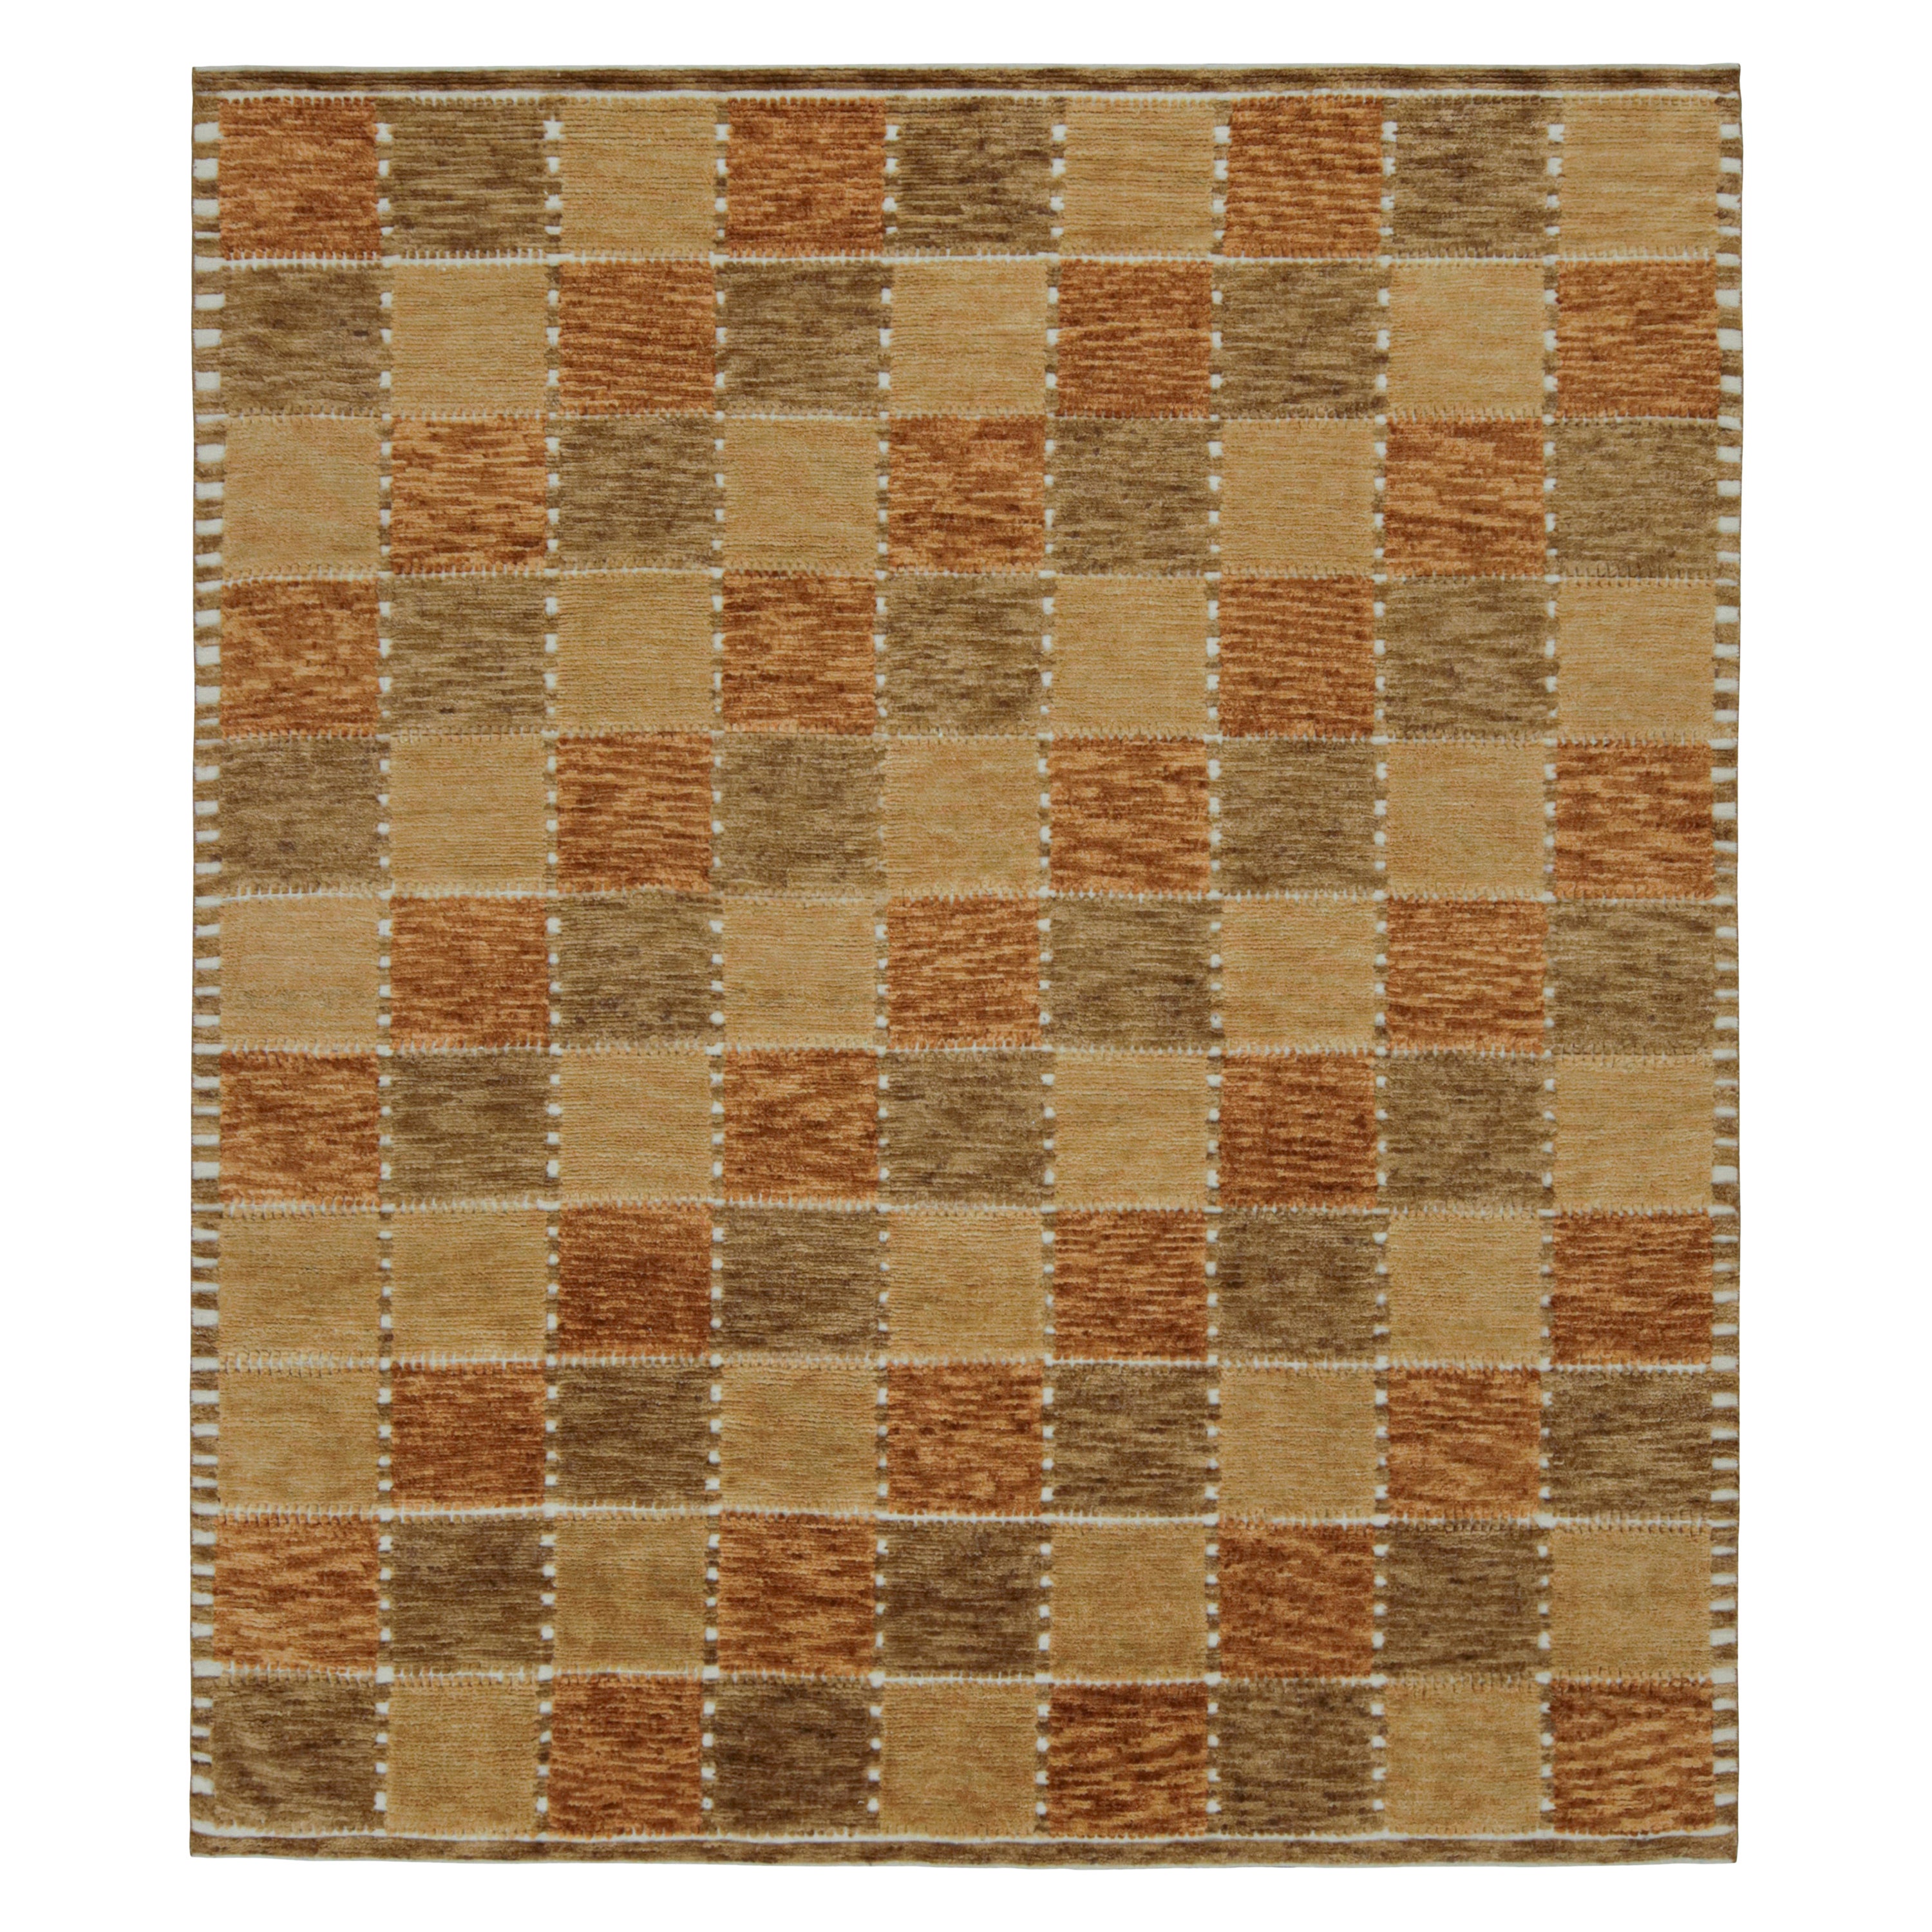 Rug & Kilim’s Scandinavian Style Rug with Geometric Patterns in Brown Tones For Sale